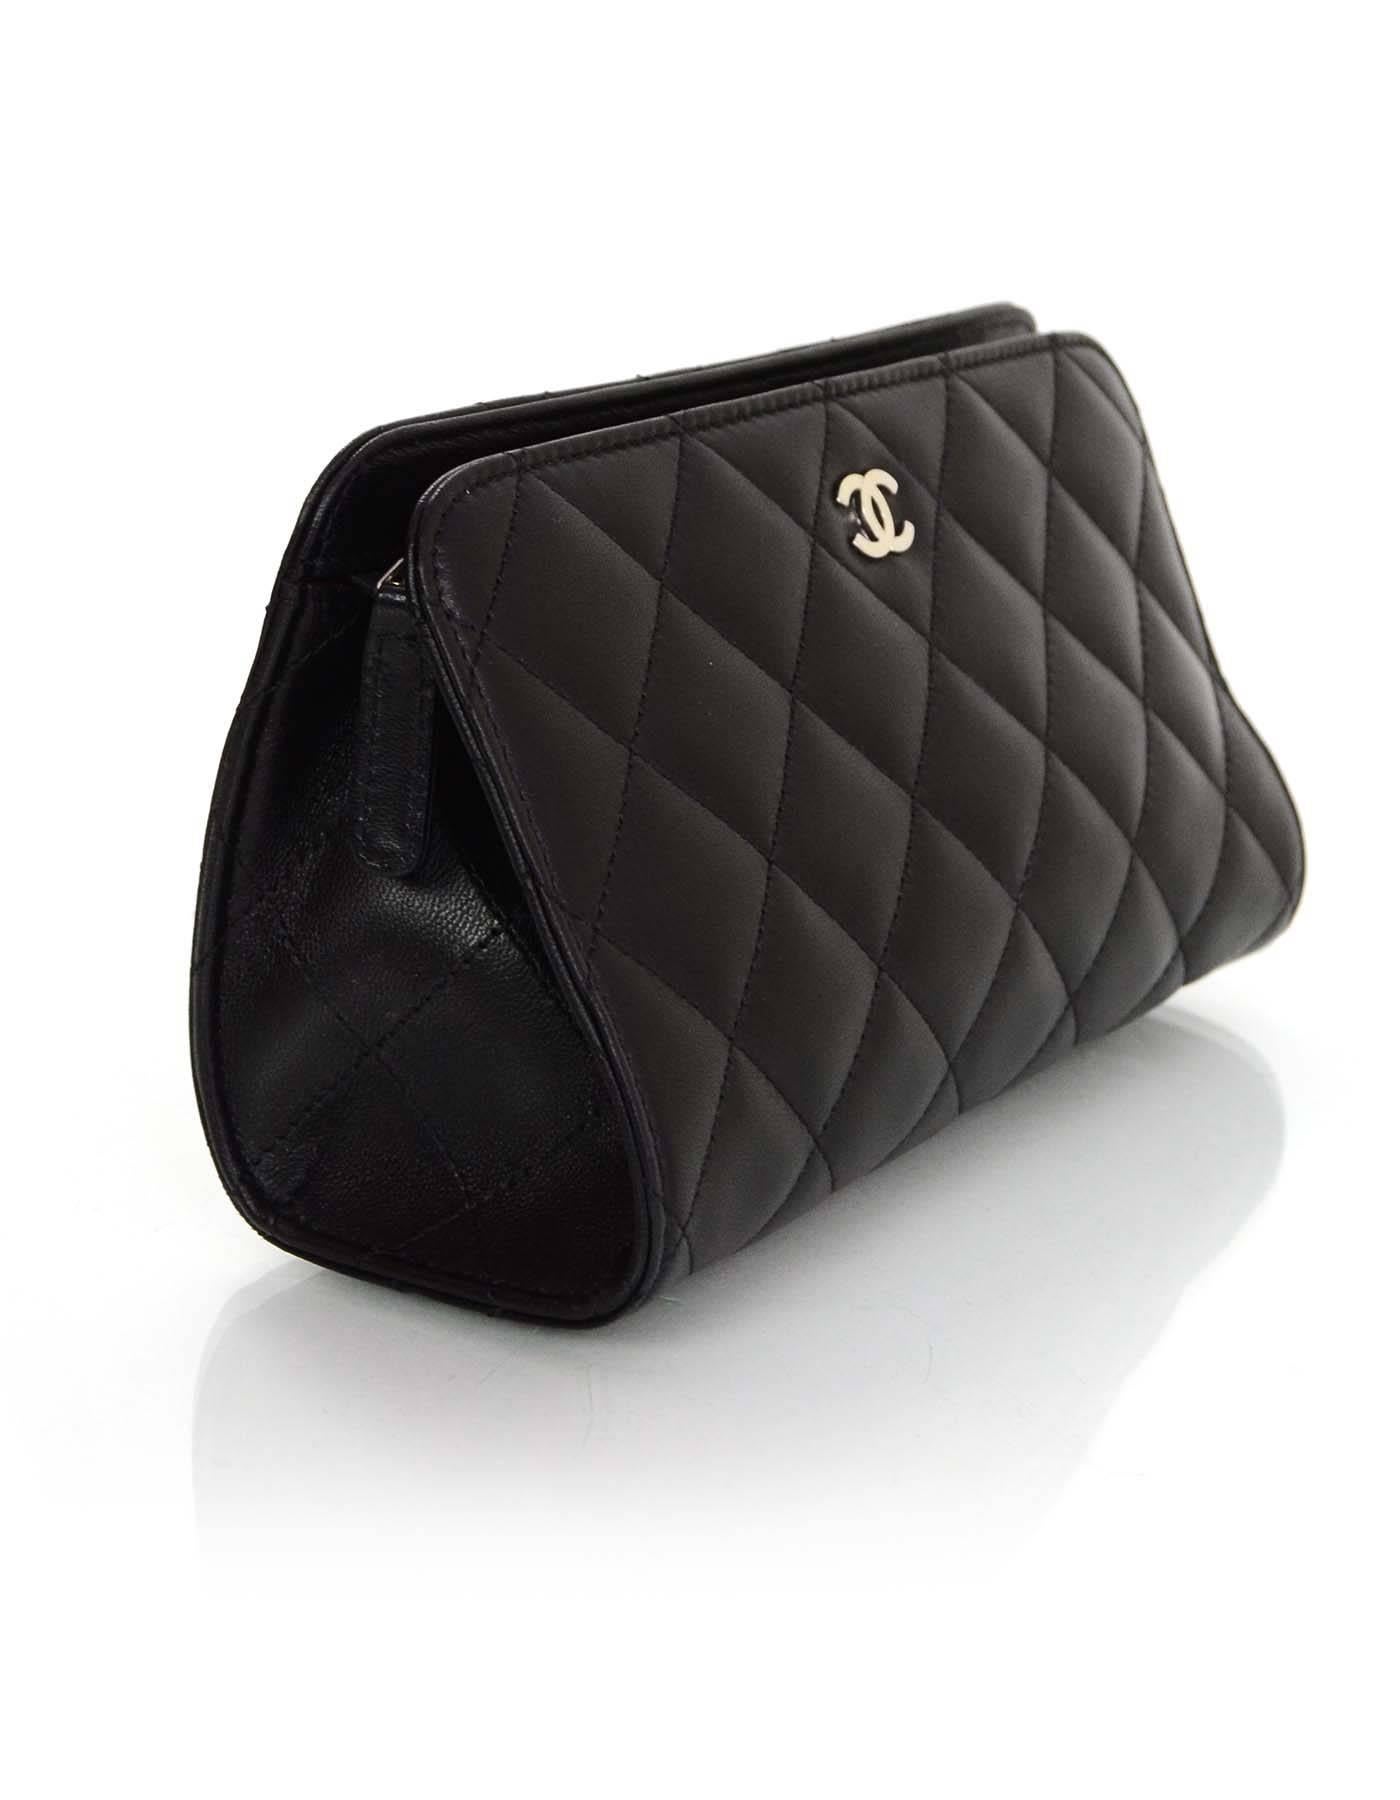 100% Authentic Chanel black leather cosmetic bag/clutch. Features classic Chanel quilting, back half moon pocket, and leather lined interior. 

Made In: France
Year of Production: 2005-2006
Color: Black
Hardware: Silvertone
Materials: Leather